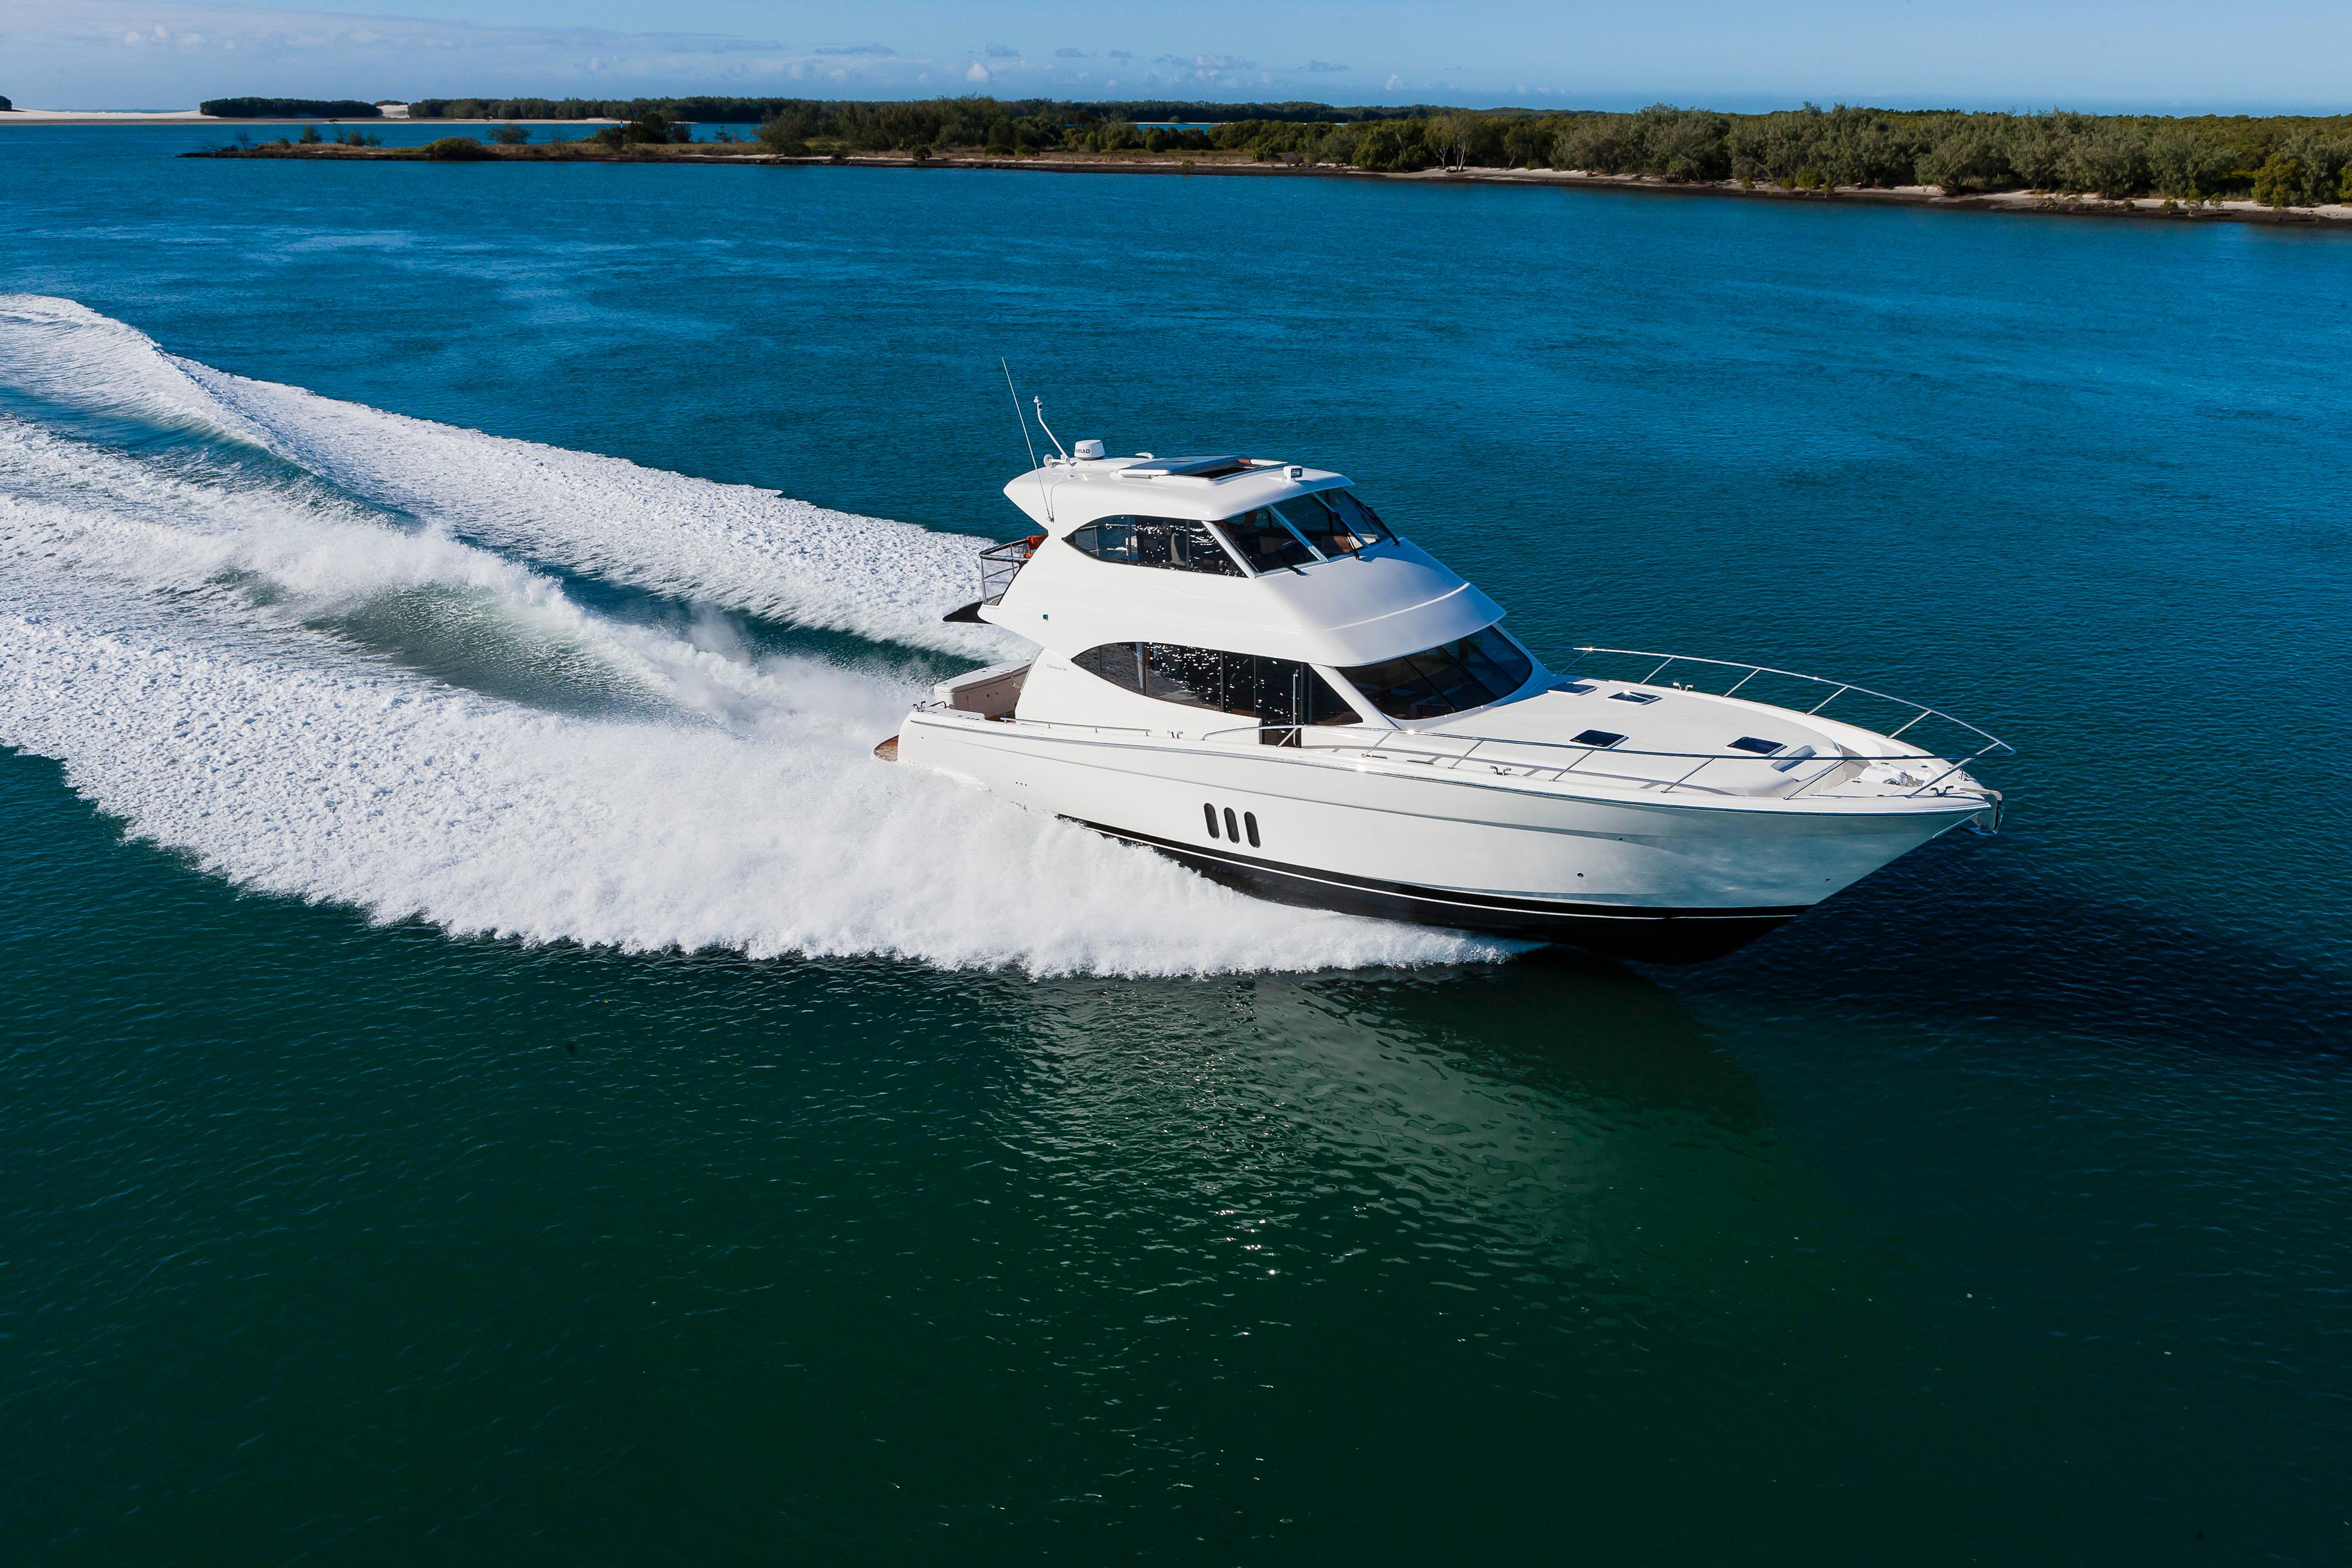 NEWS - Hurricane Sandy impacts Fort Lauderdale boat show attendance